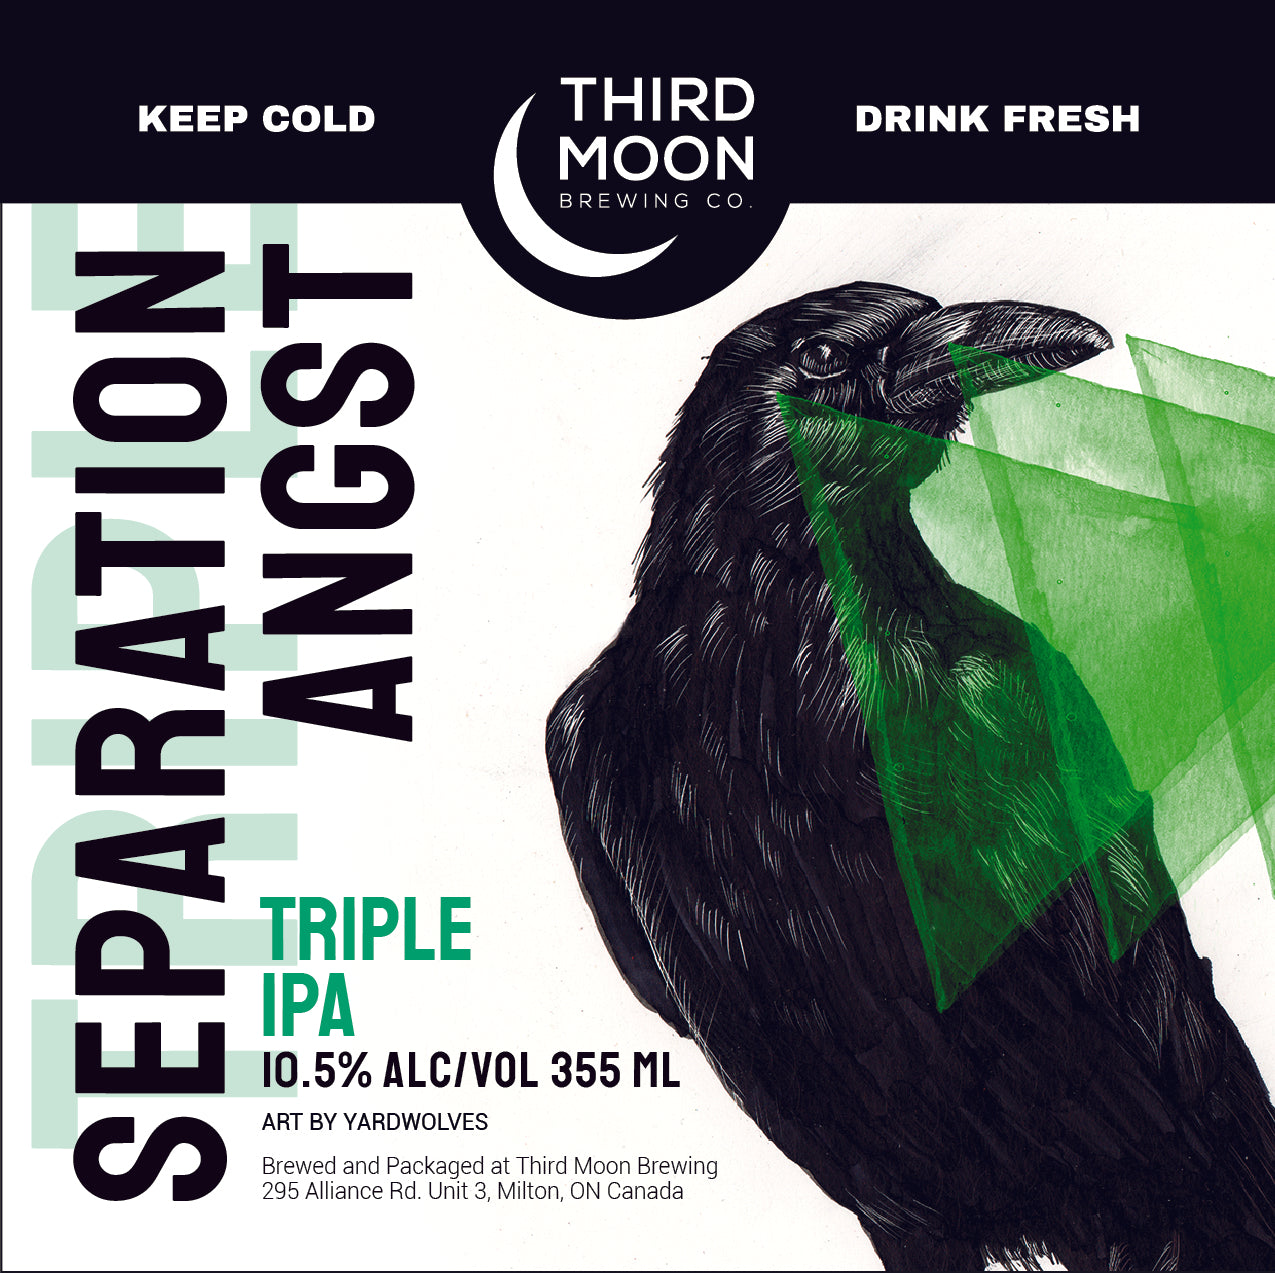 Triple IPA - 4-pk of "Separation Angst" tall sleek cans